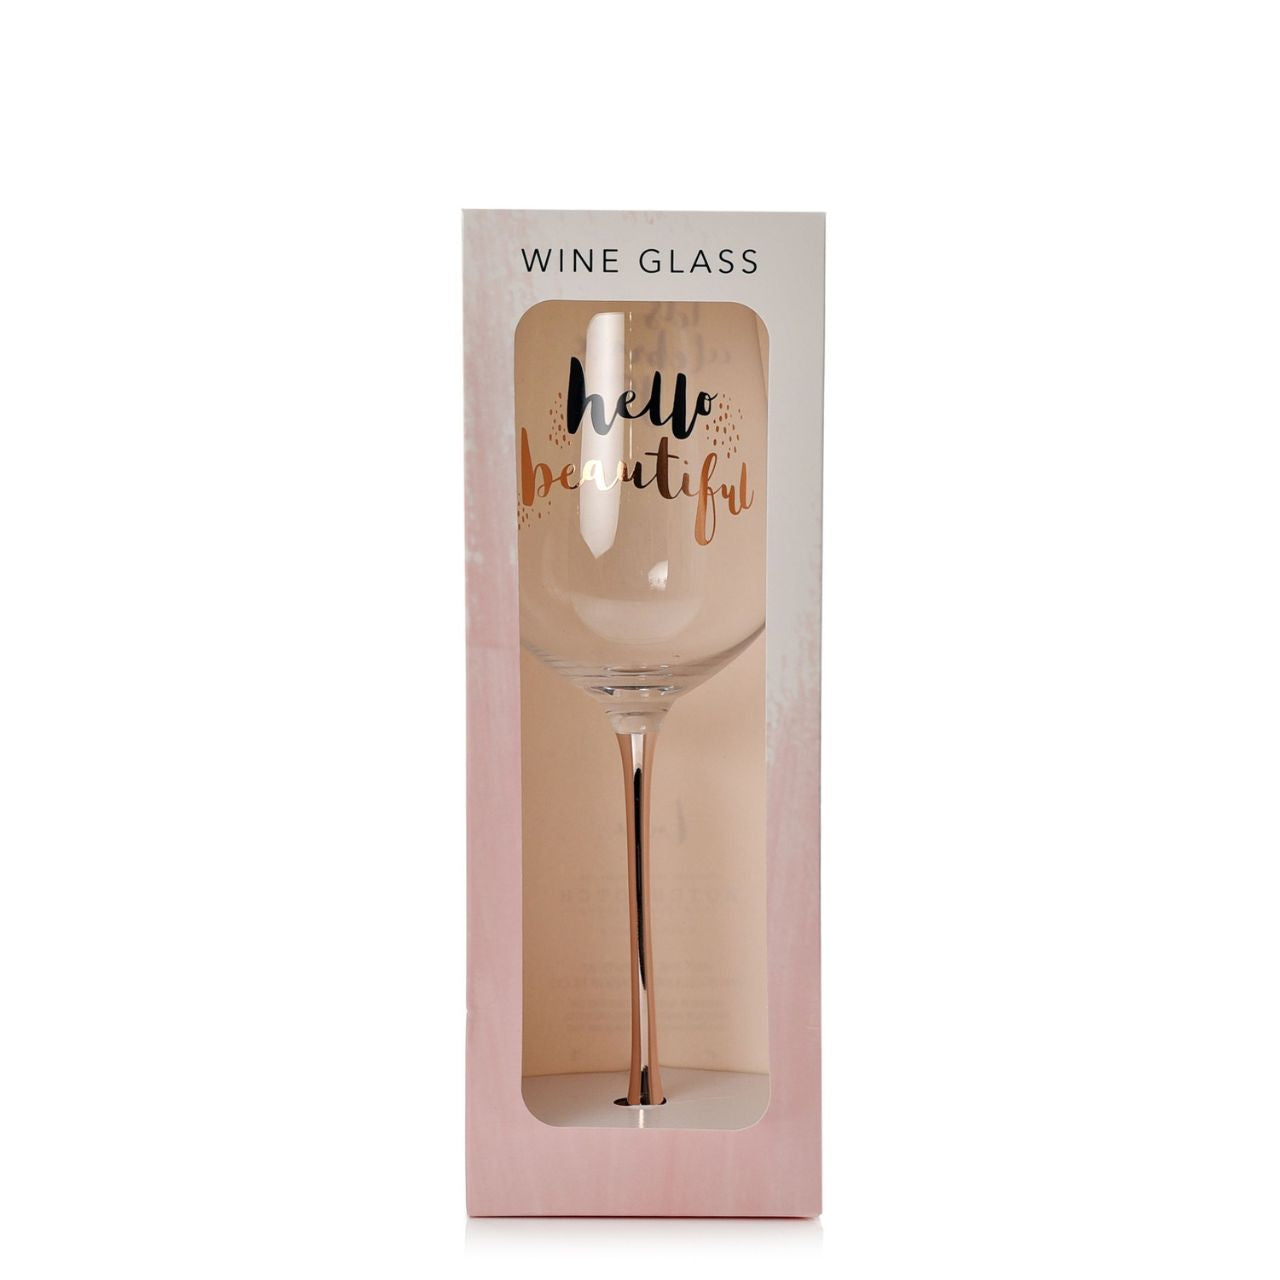 Hotchpotch Luxe Wine Glass - Hello Beautiful  With a sweet 'hello beautiful; title and stunning rose gold foil features, this wine glass is sure to put a smile on a special someone's face.